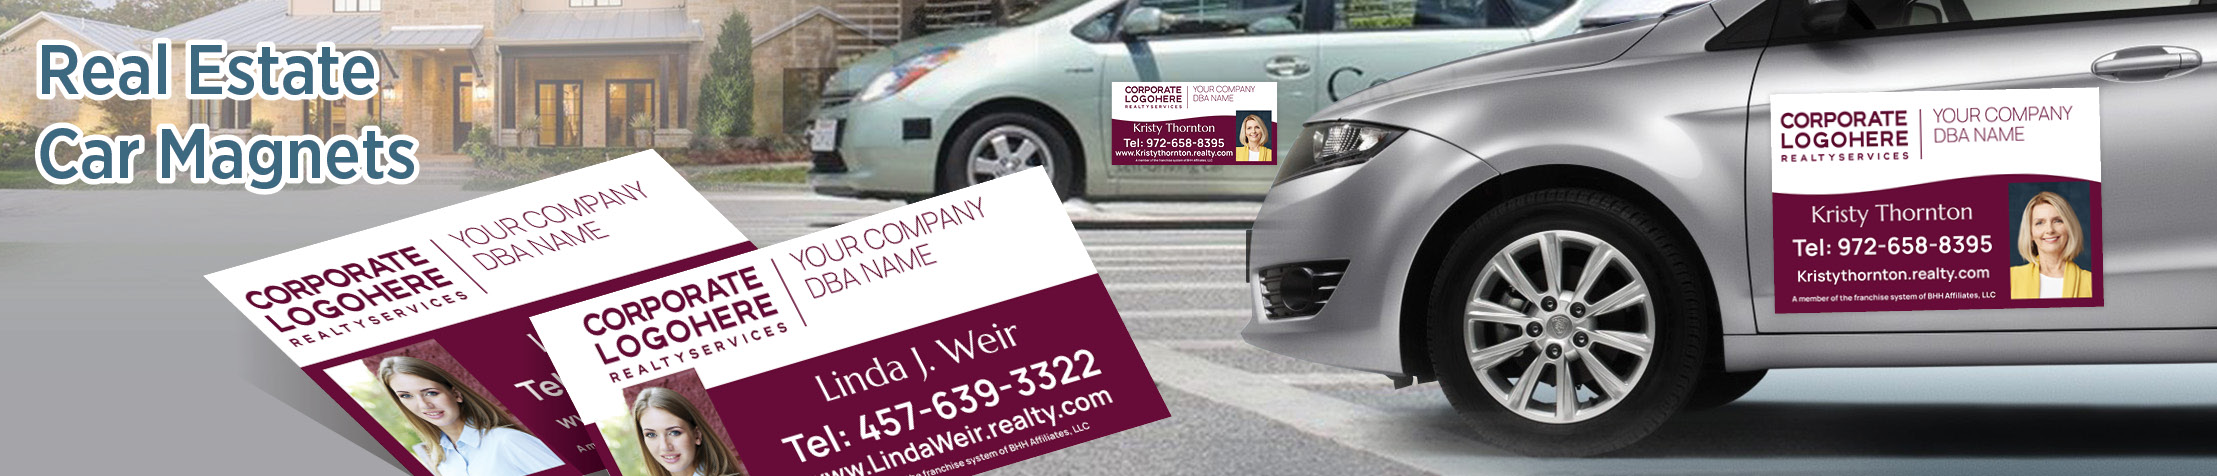 Berkshire Hathaway Real Estate Car Magnets - Berkshire Hathaway  custom car magnets for realtors, with or without photo | BestPrintBuy.com